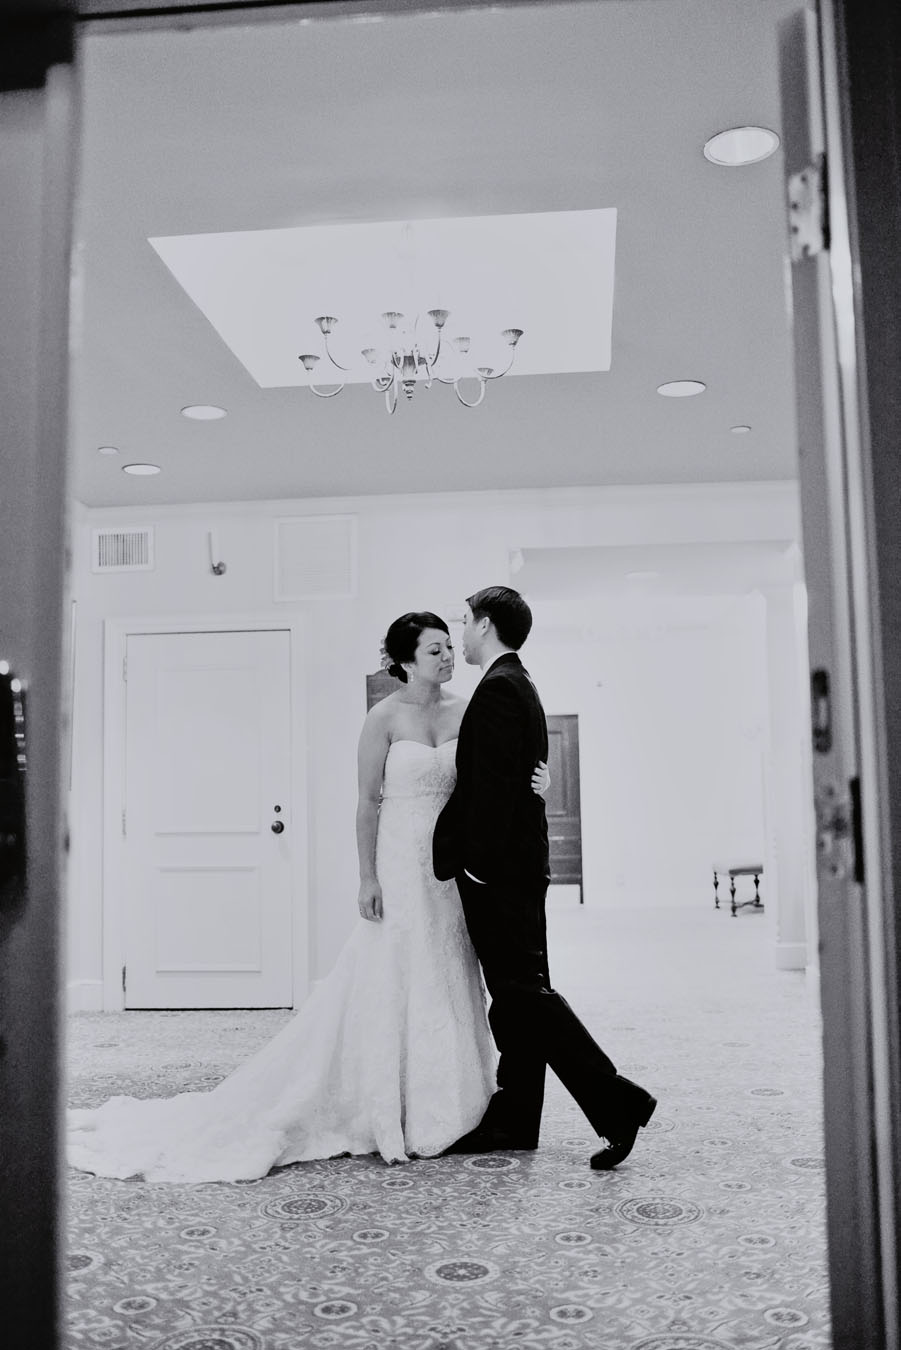 classic elegant wedding at the driskill hotel in downtown austin photographed by austin wedding photographer table4 weddings